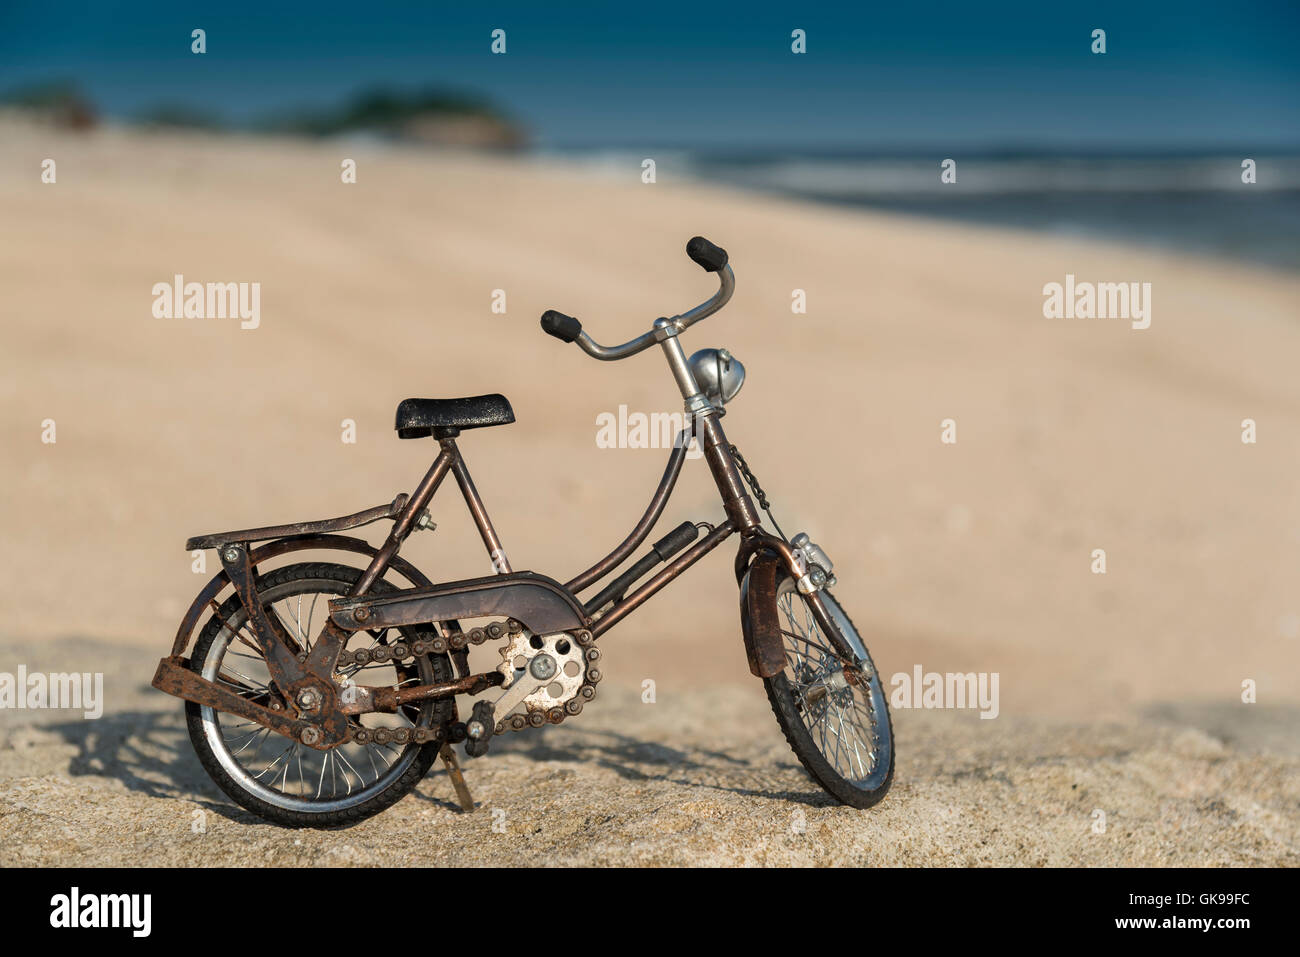 Small model bicycle on the beach Stock Photo